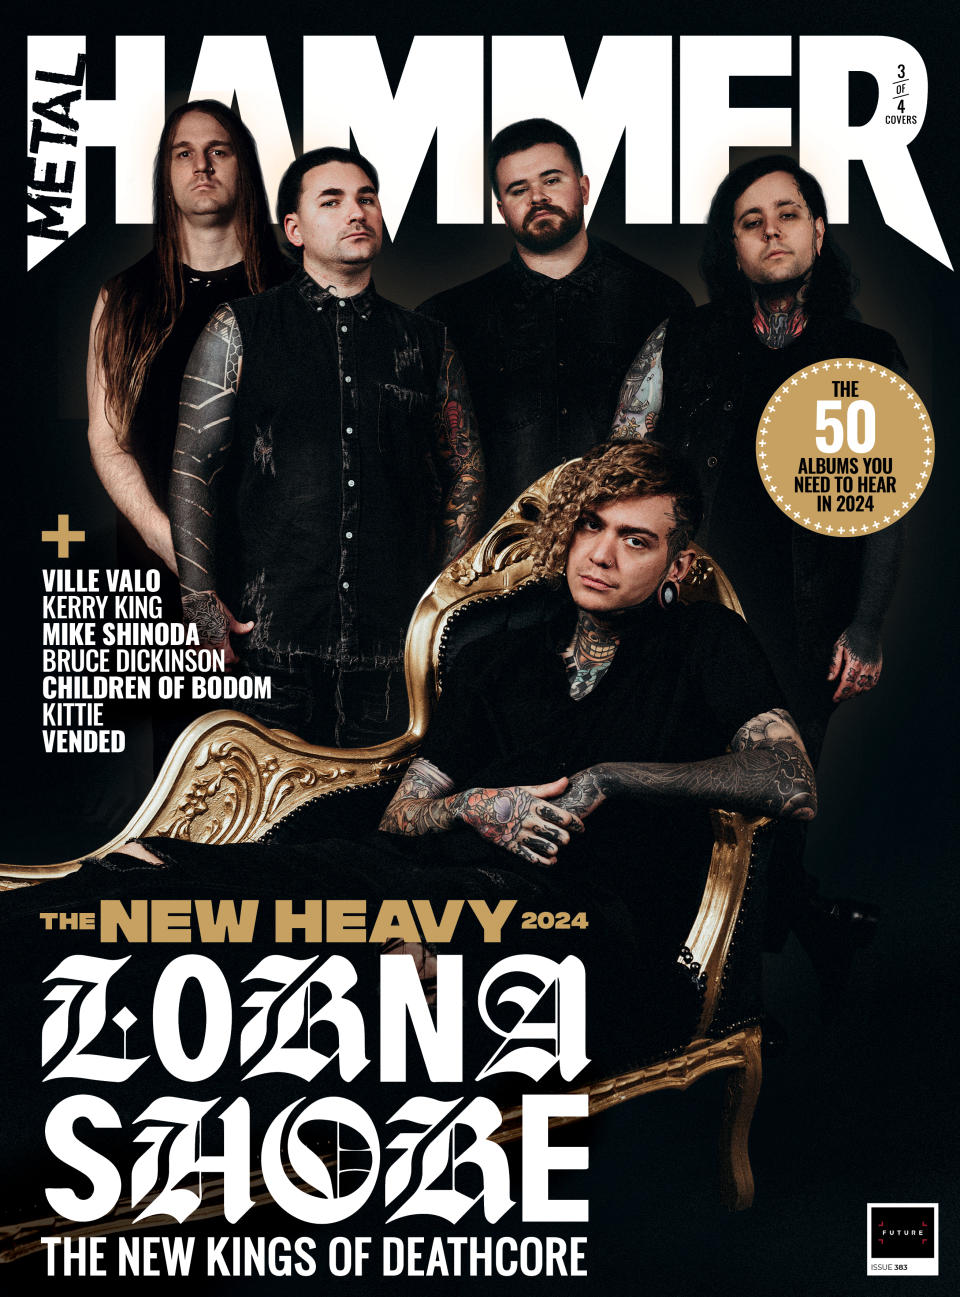 Lorna Shore on the cover of Metal Hammer